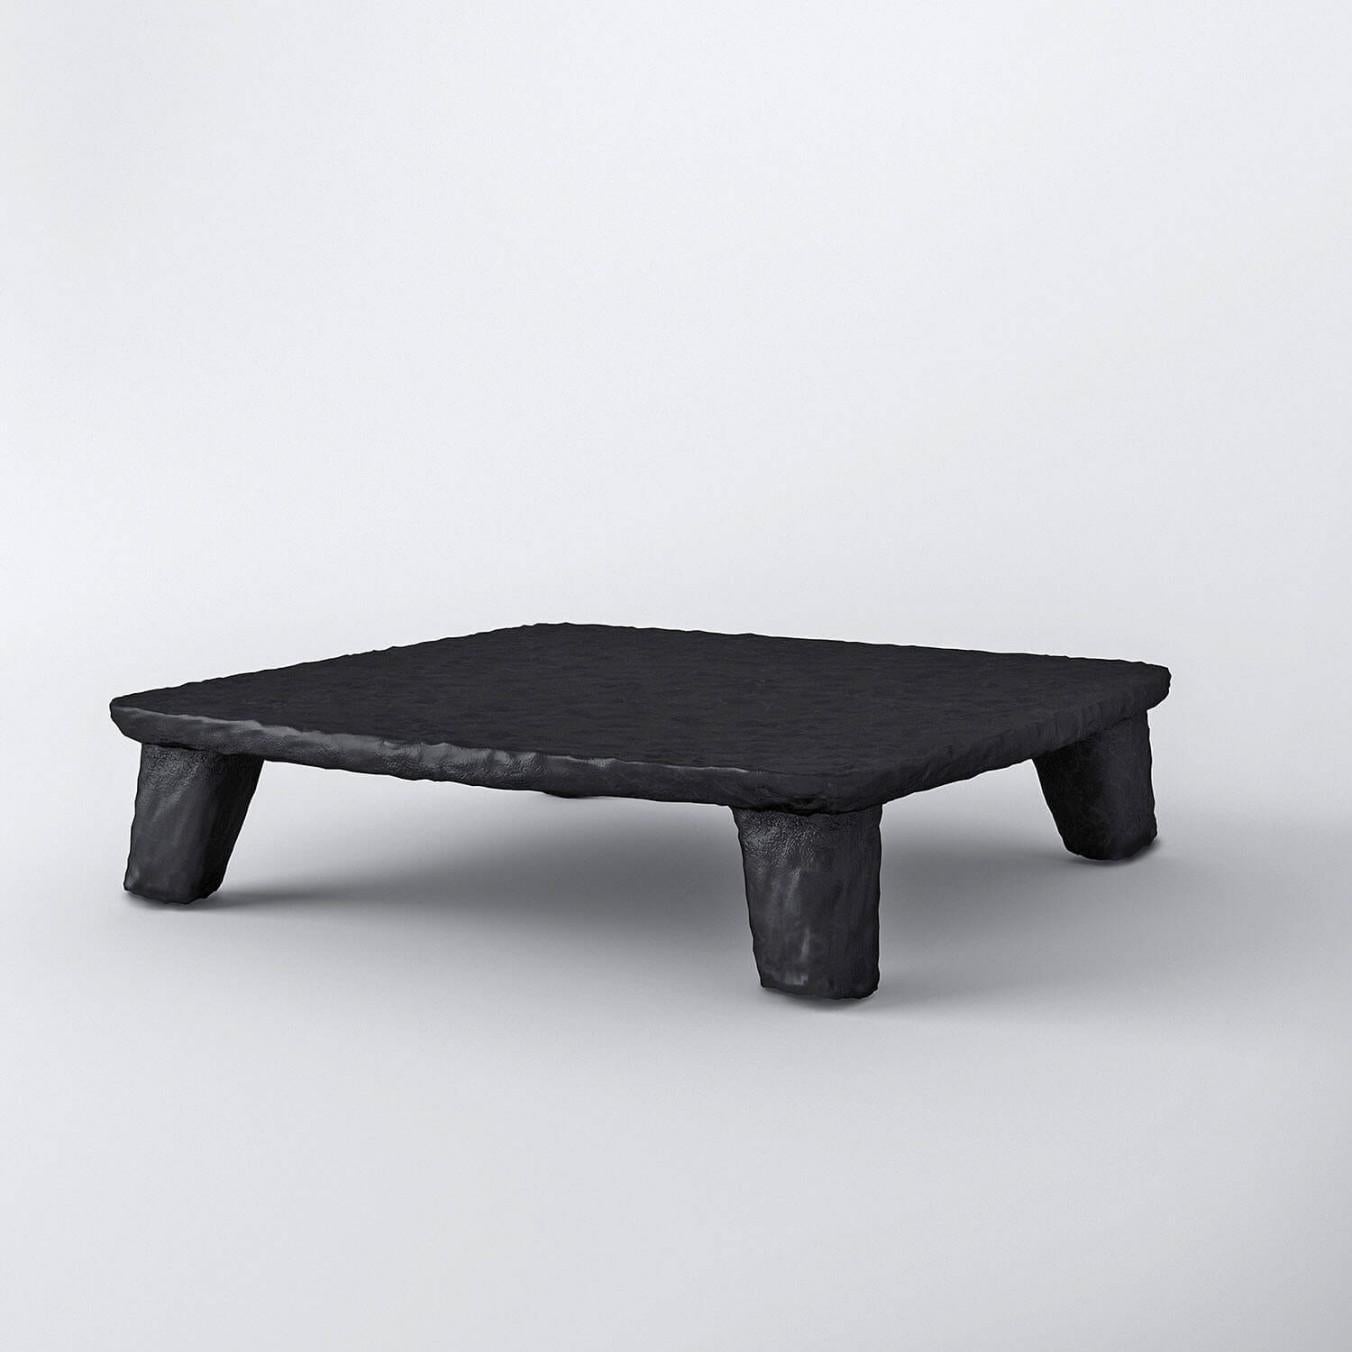 Steel Sculpted Contemporary Long Coffee Table by FAINA